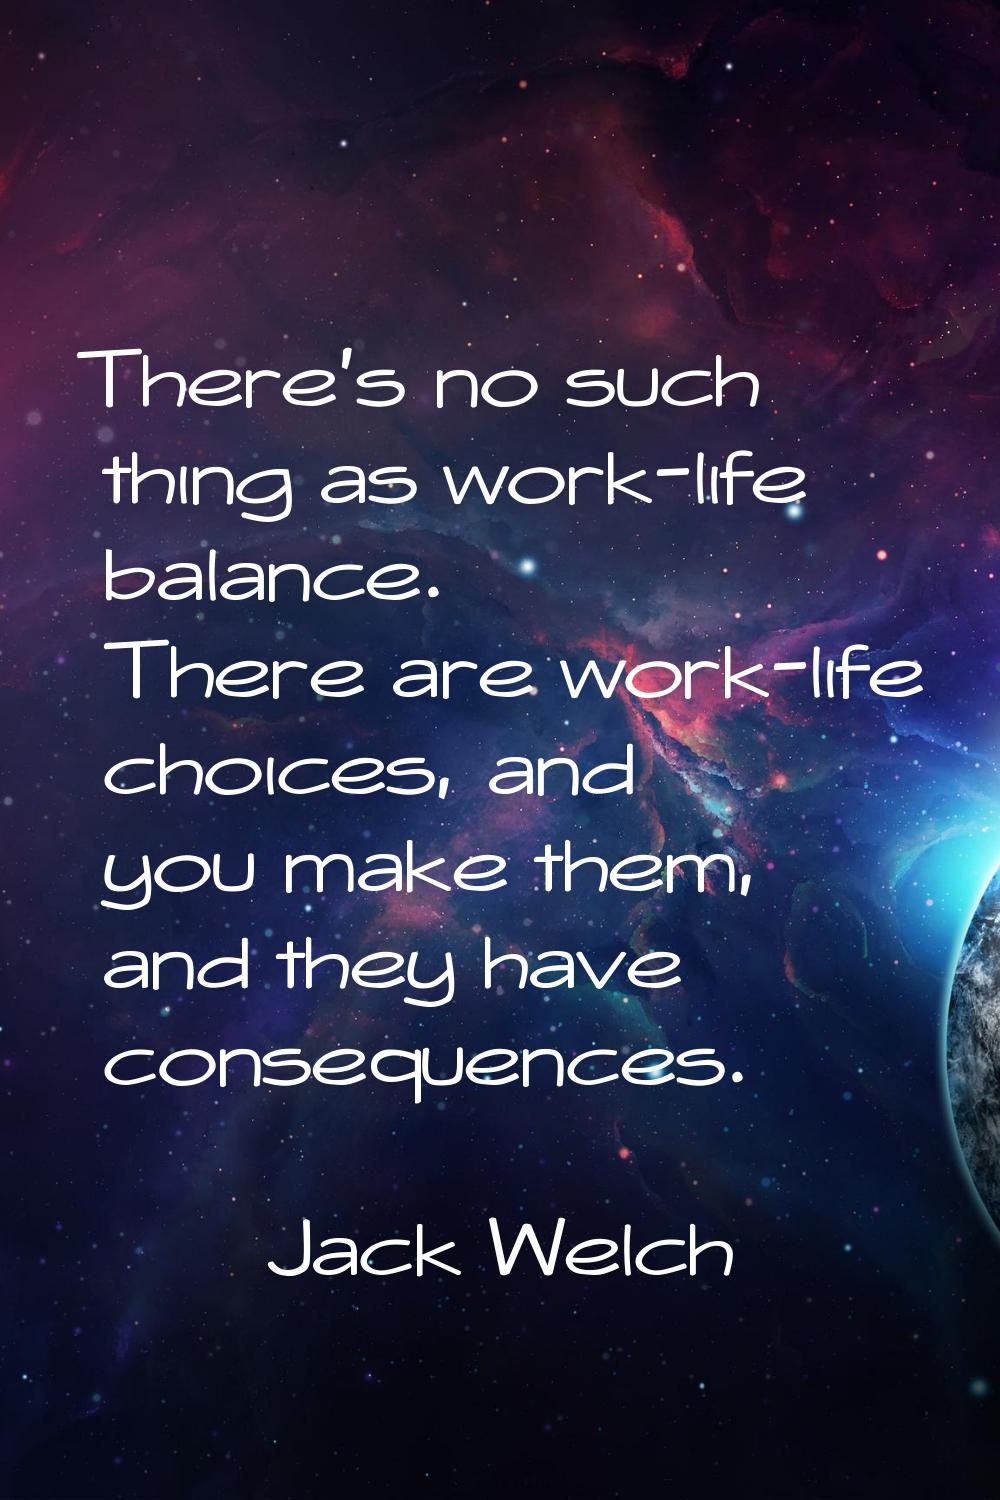 There's no such thing as work-life balance. There are work-life choices, and you make them, and the